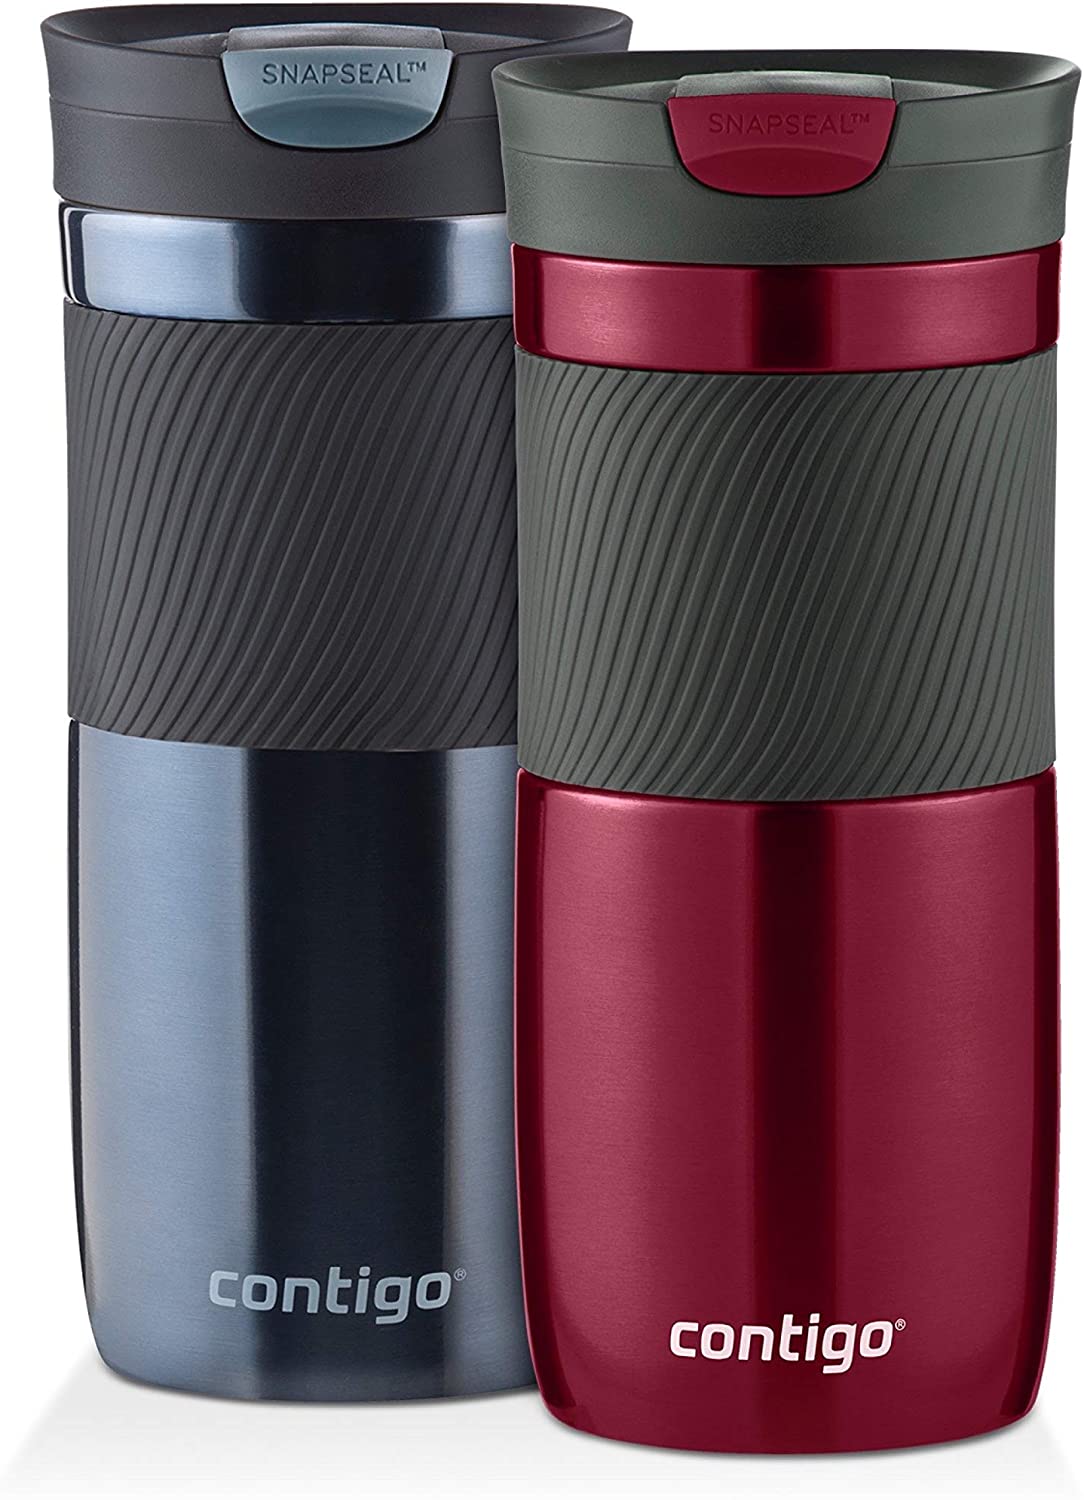 2-Pack 16-Oz Contigo Byron SnapSeal Vacuum-Insulated Travel Mug, Grip Style (Wine & Stormy Weather) $15.40 + Free S&H w/ Prime or $25+